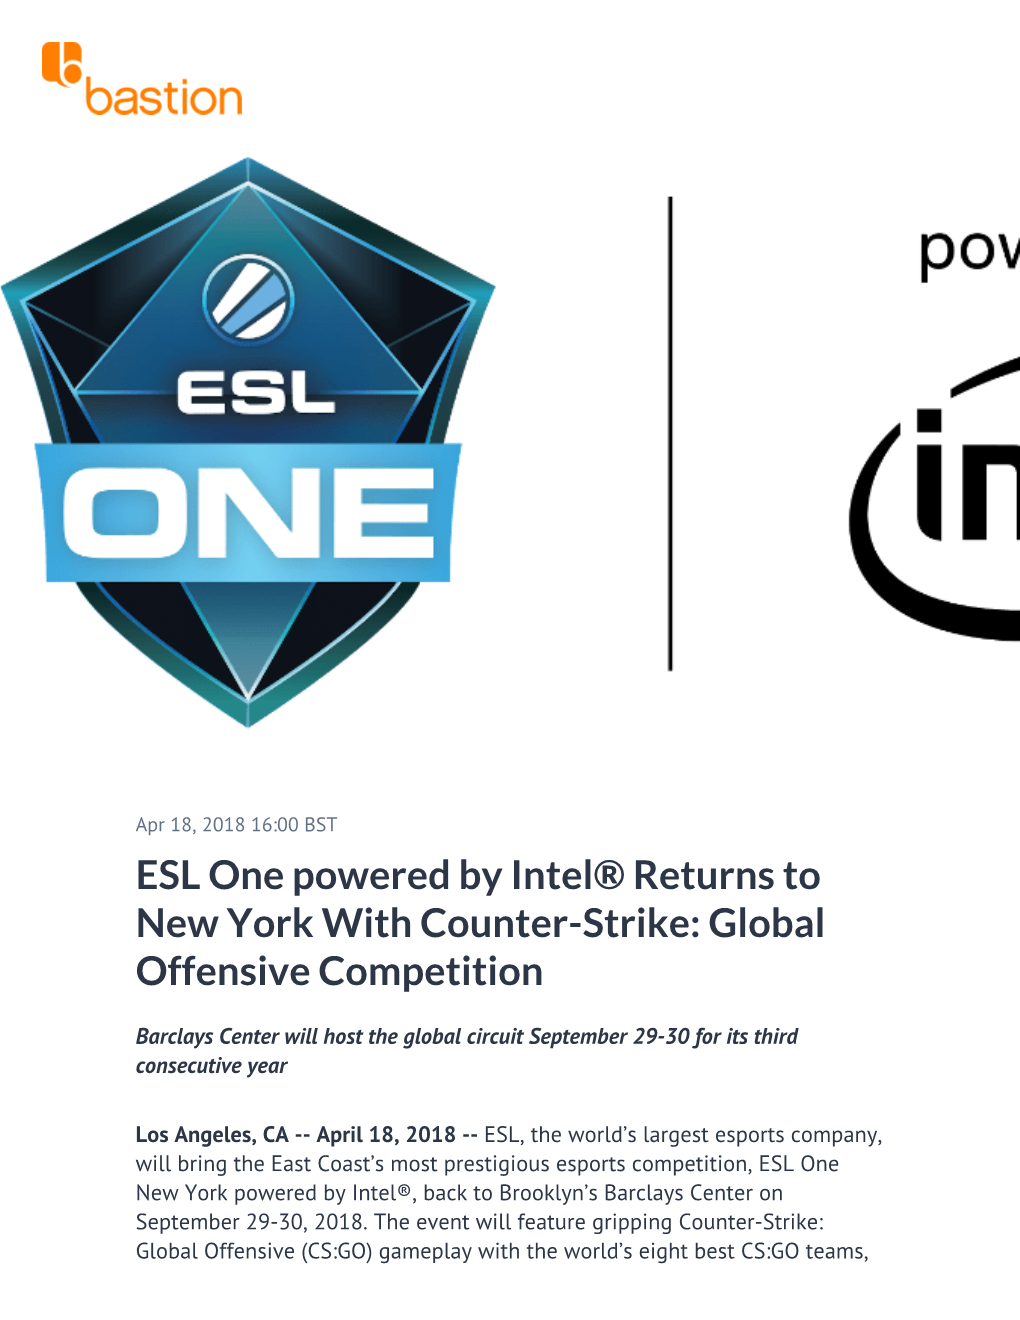 ESL One Powered by Intel® Returns to New York with Counter-Strike: Global Offensive Competition